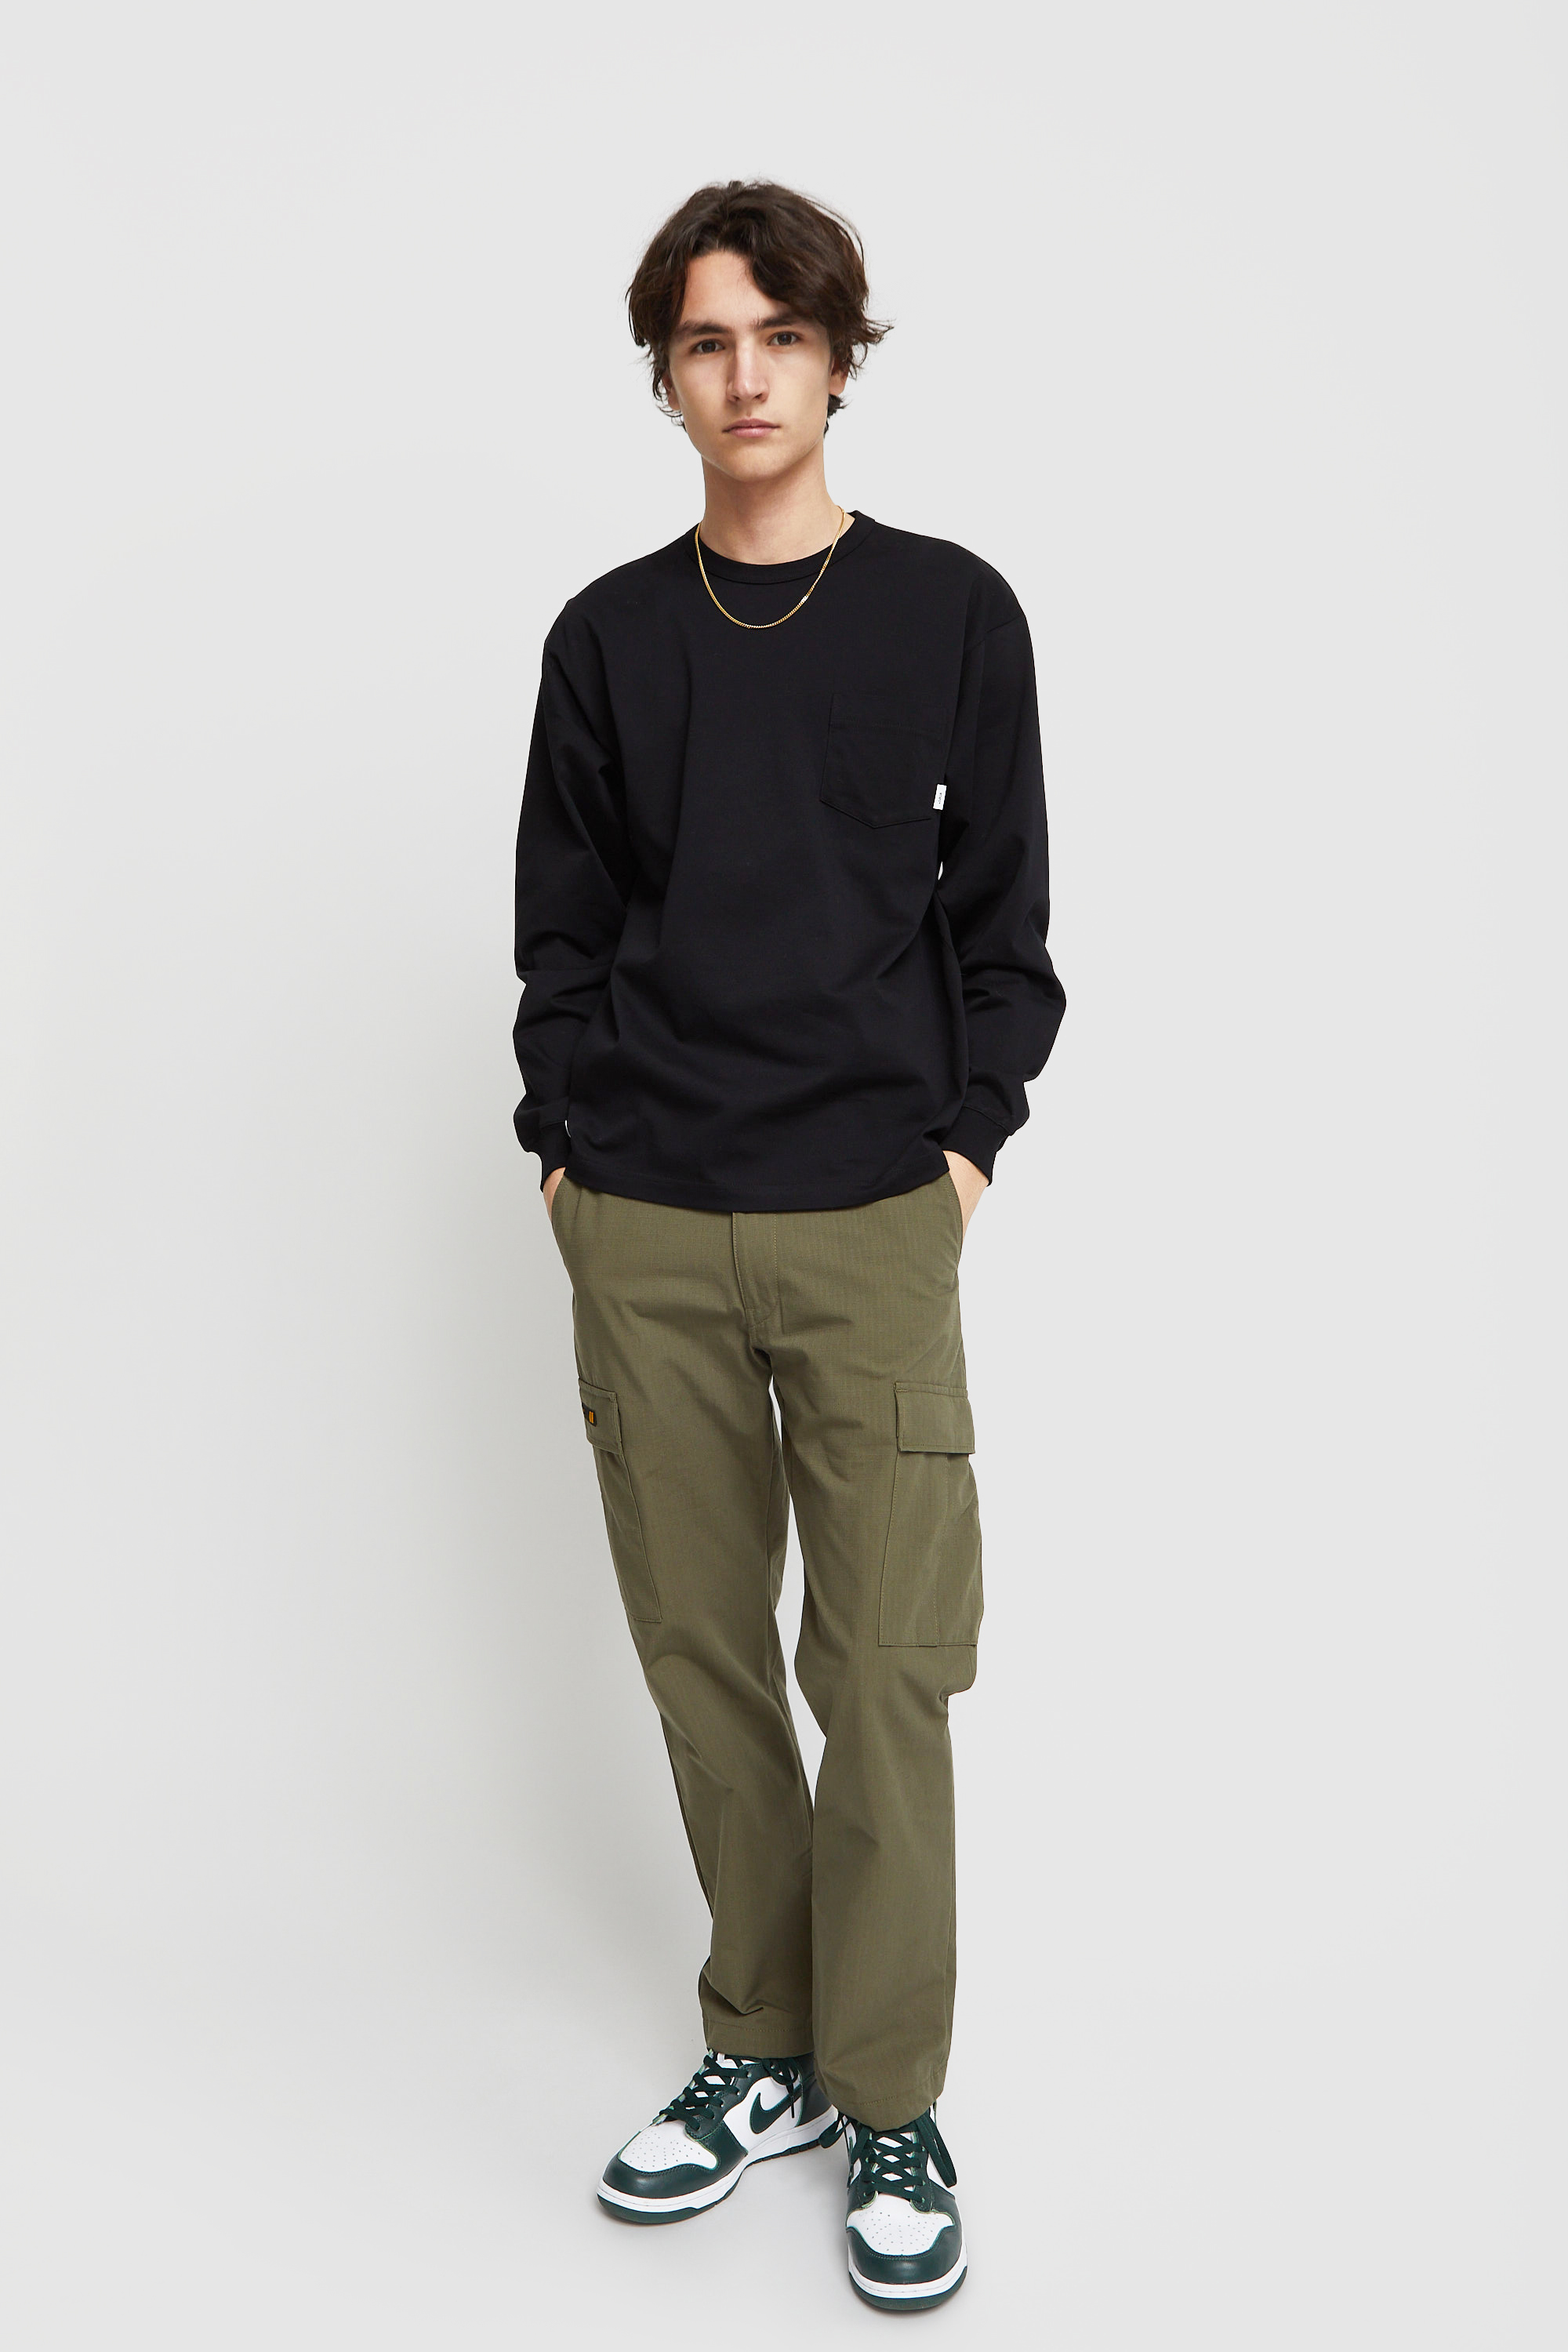 JUNGLE STOCK / TROUSERS / NYCO. RIPSTOP